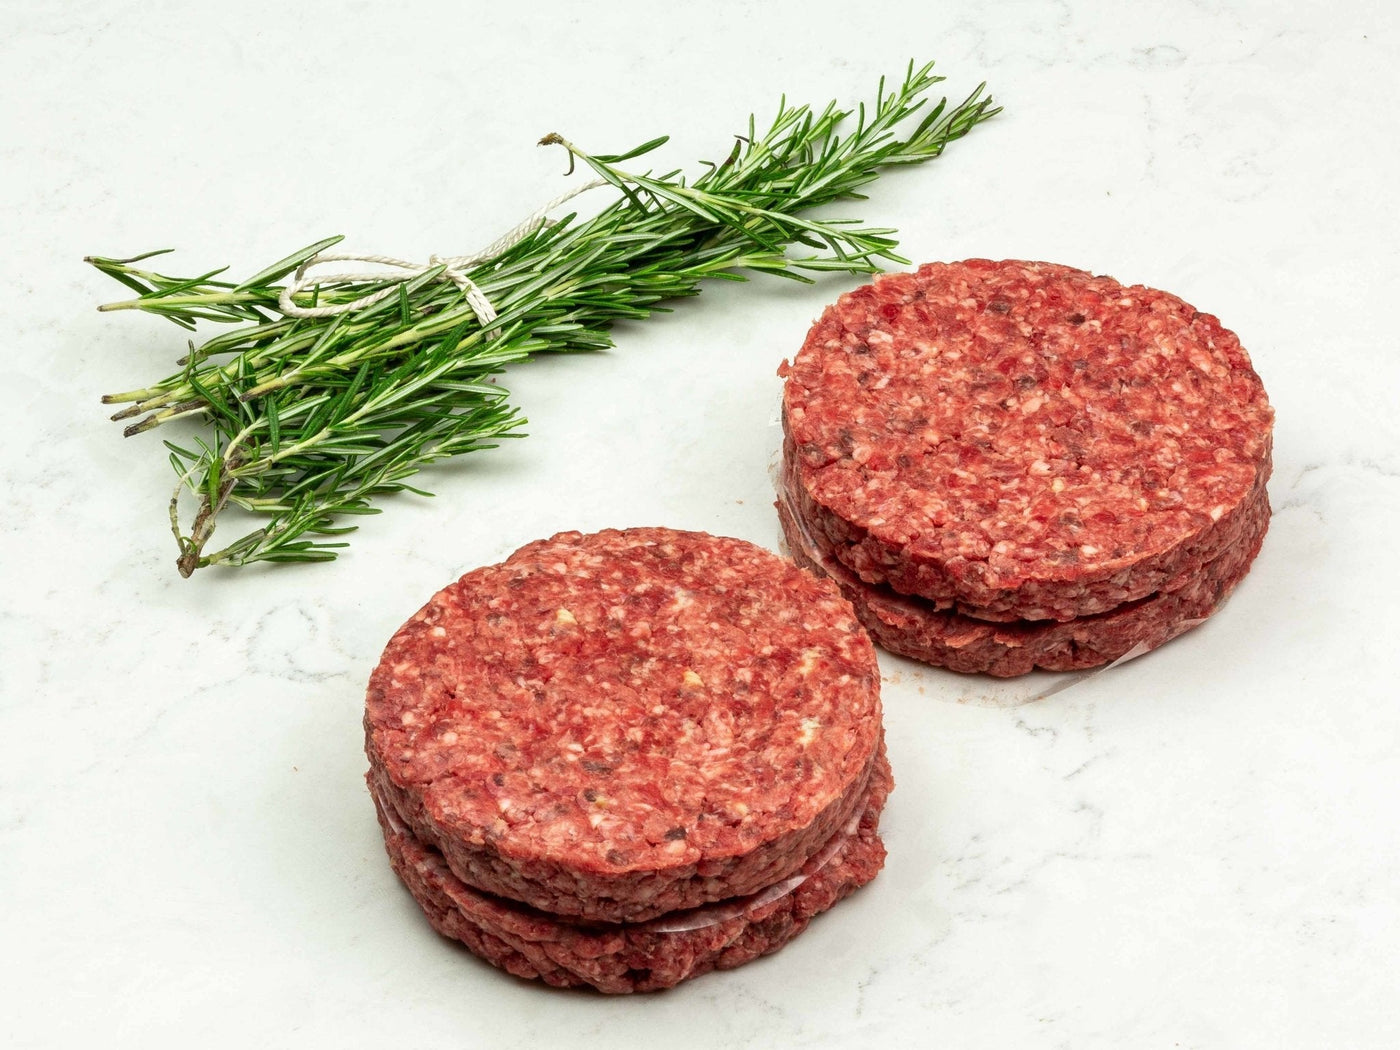 Wagyu x Galician Burger Mince (to make your own at home) - Thomas Joseph Butchery - Ethical Dry-Aged Meat The Best Steak UK Thomas Joseph Butchery